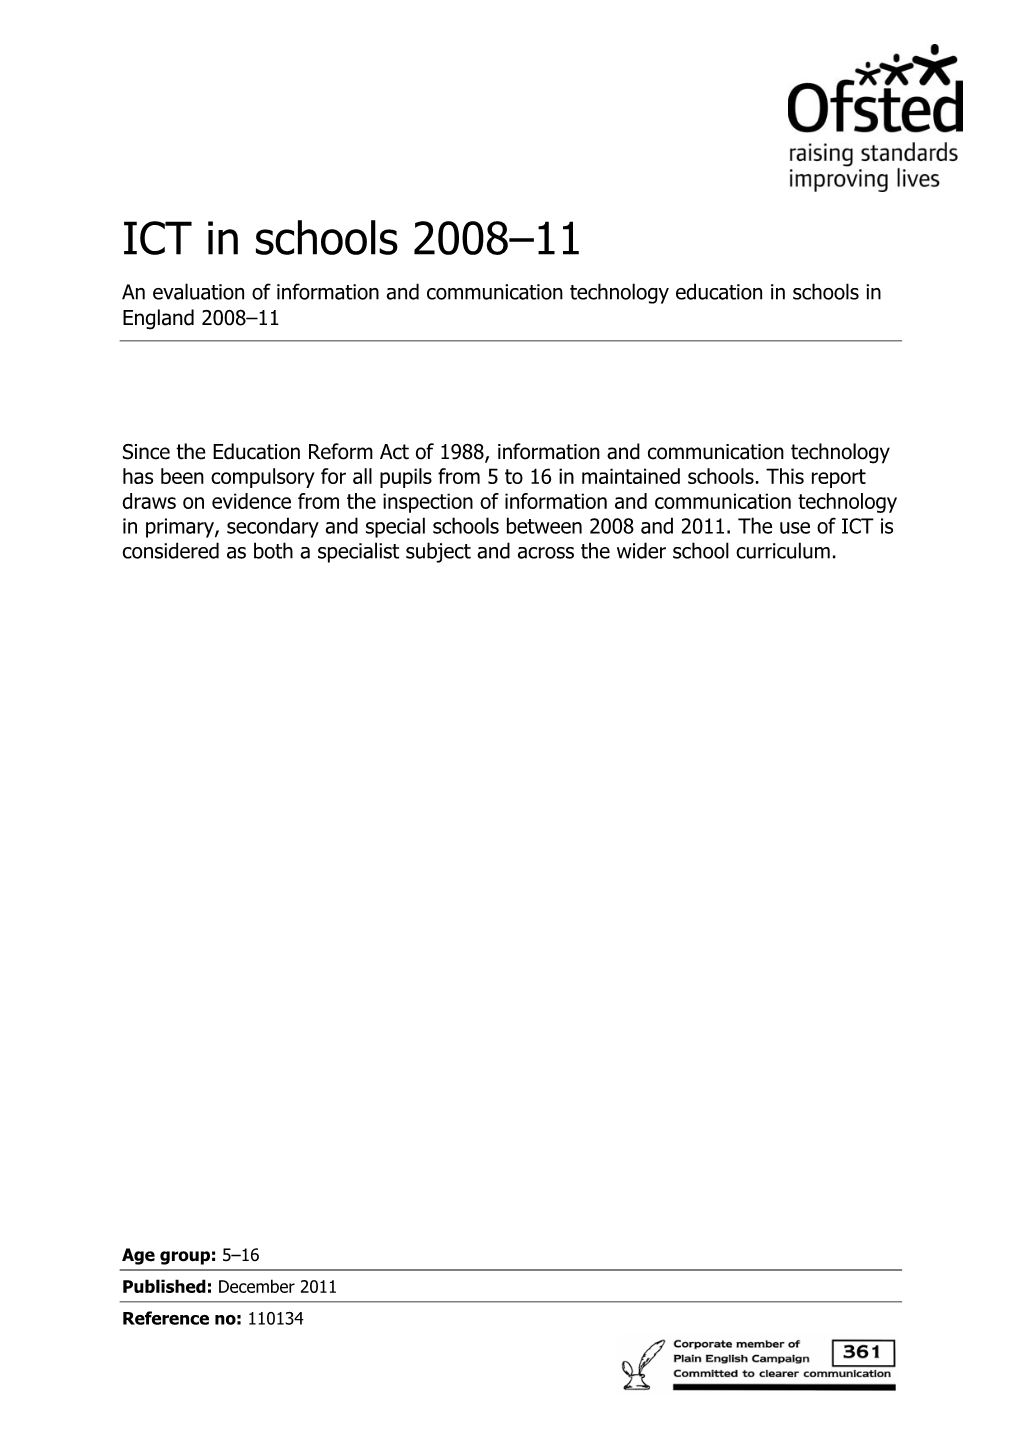 ICT in Schools 2008–11 an Evaluation of Information and Communication Technology Education in Schools in England 2008–11